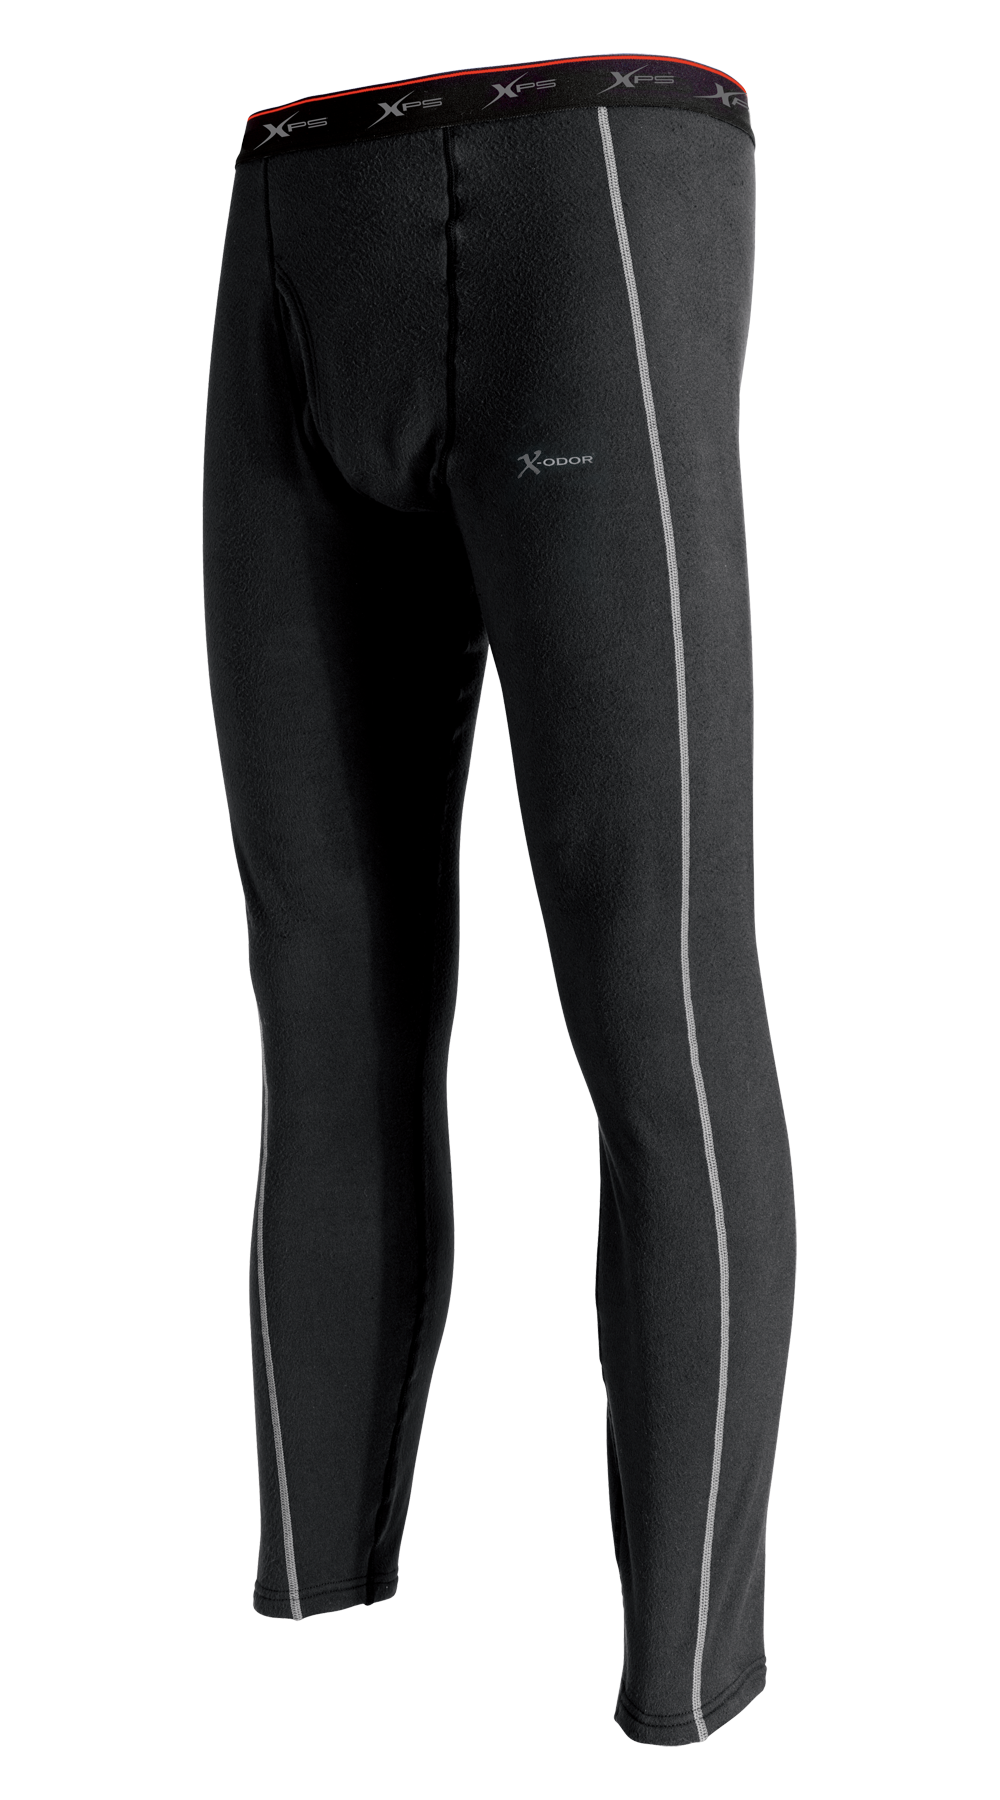 Under Armour Men's Expedition Weight Baselayer 4.0 Leggings